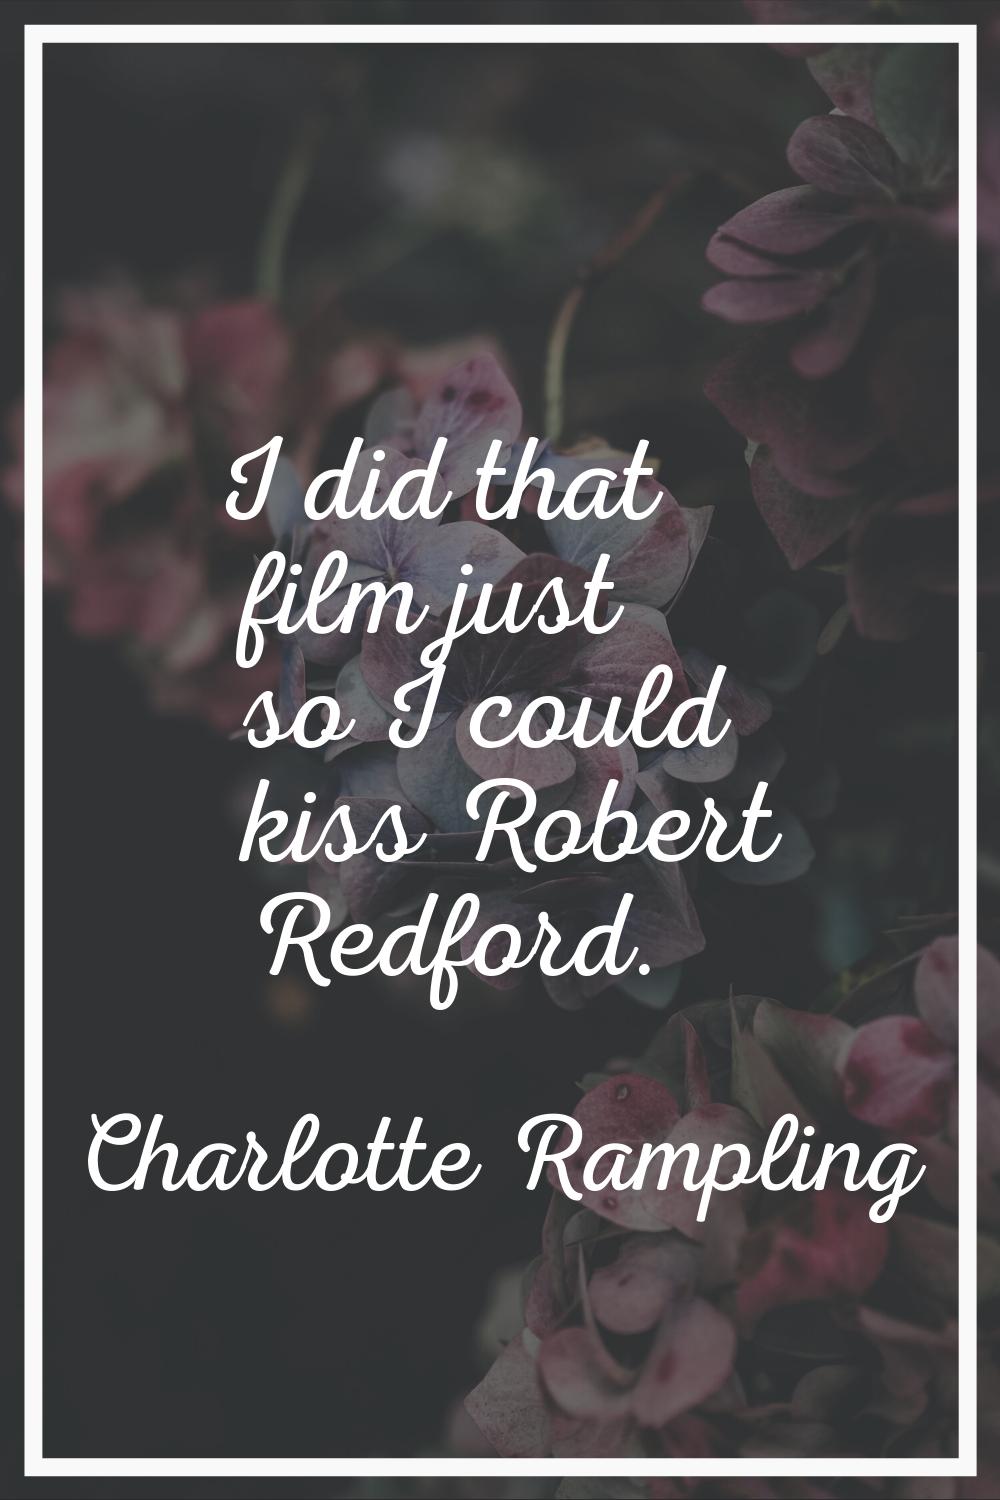 I did that film just so I could kiss Robert Redford.